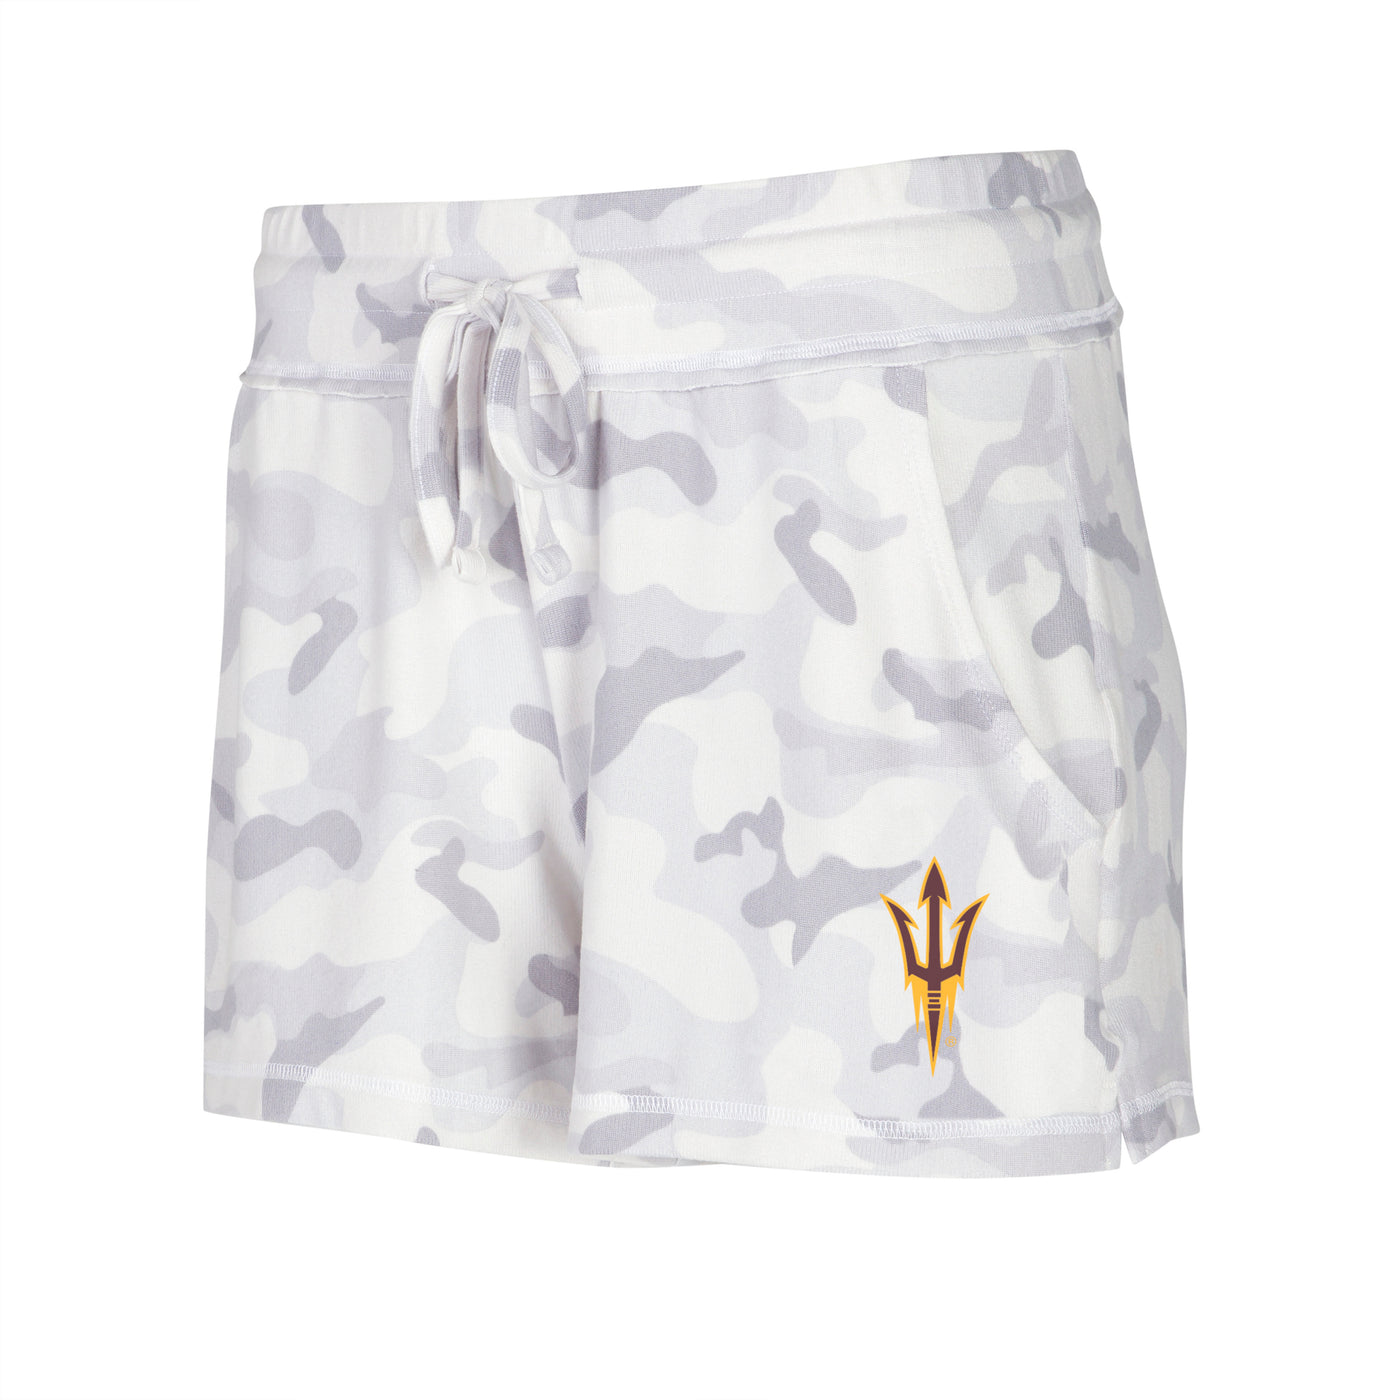 ASU white women's shorts with gray camo print, drawstring, and a pitchfork on the bottom on the leg